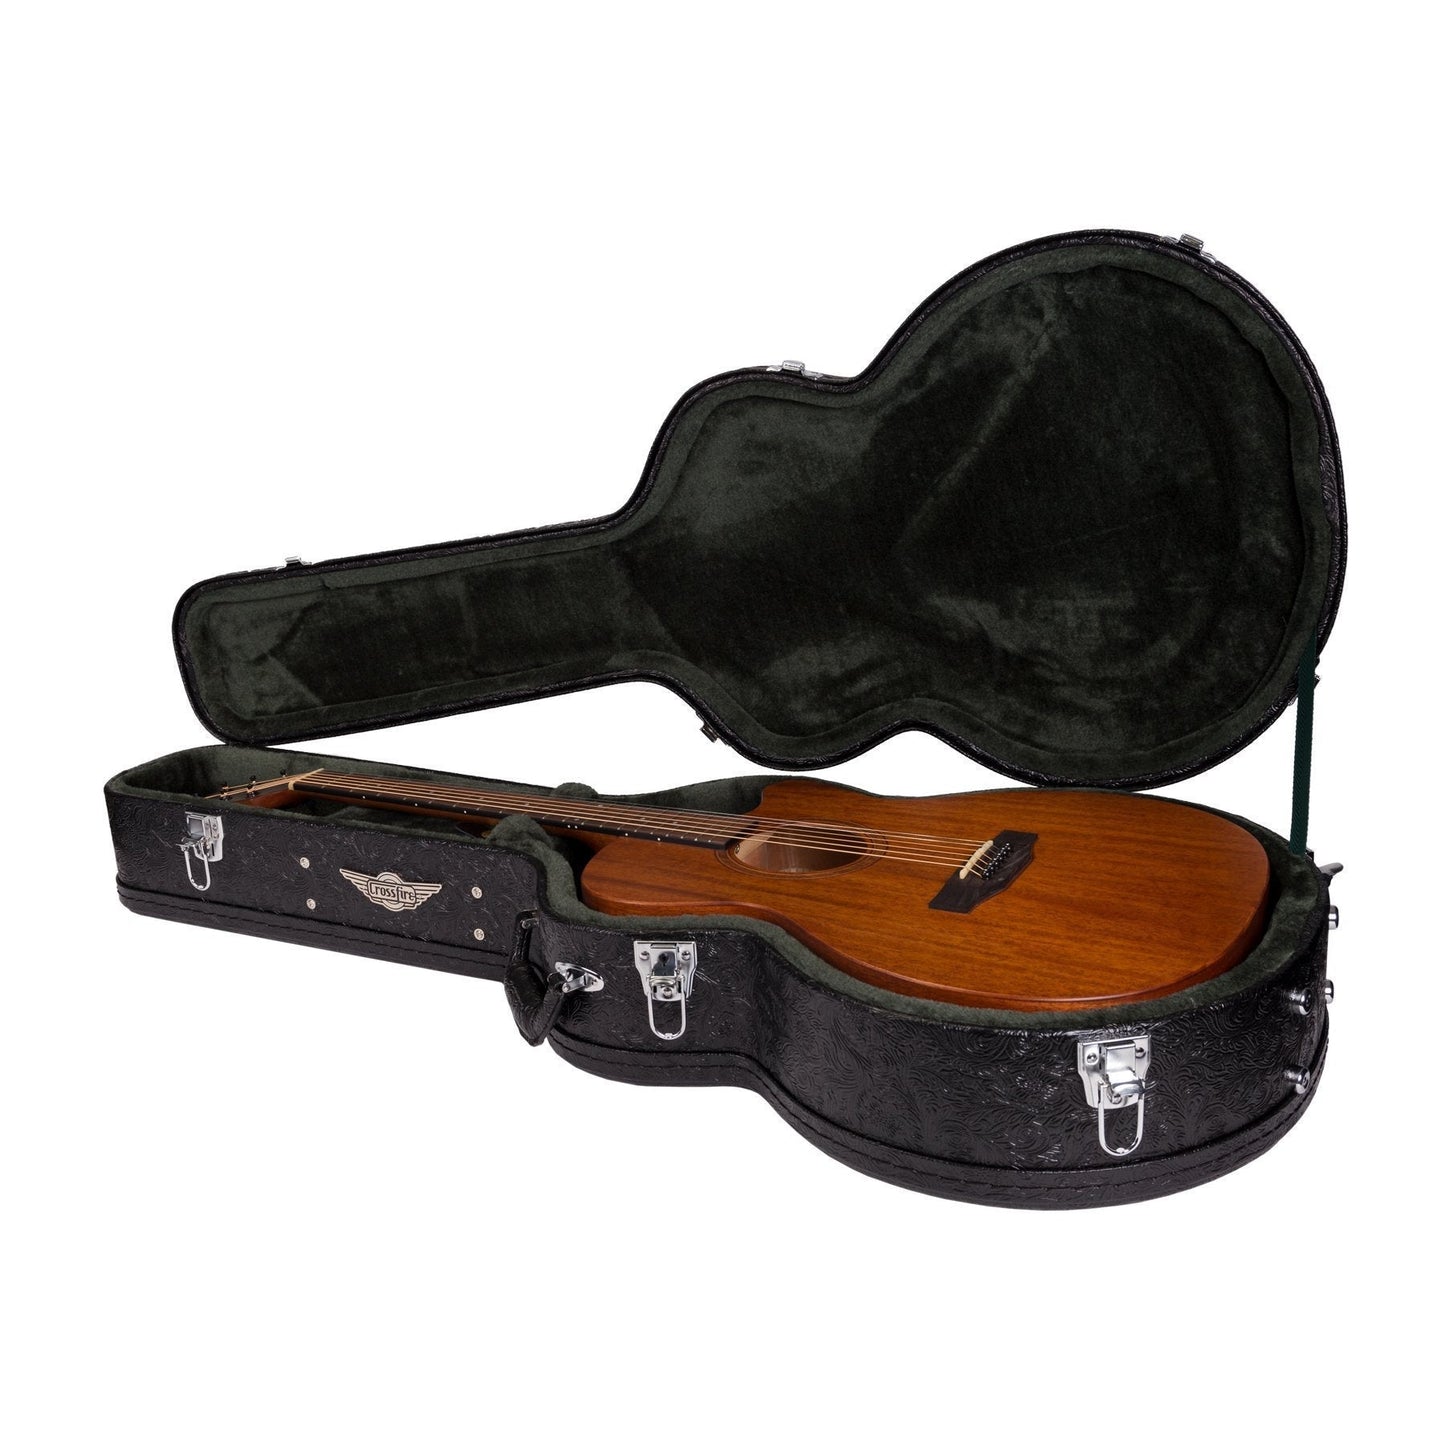 Crossfire Deluxe Shaped Small Body Acoustic Guitar Hard Case (Paisley Black)